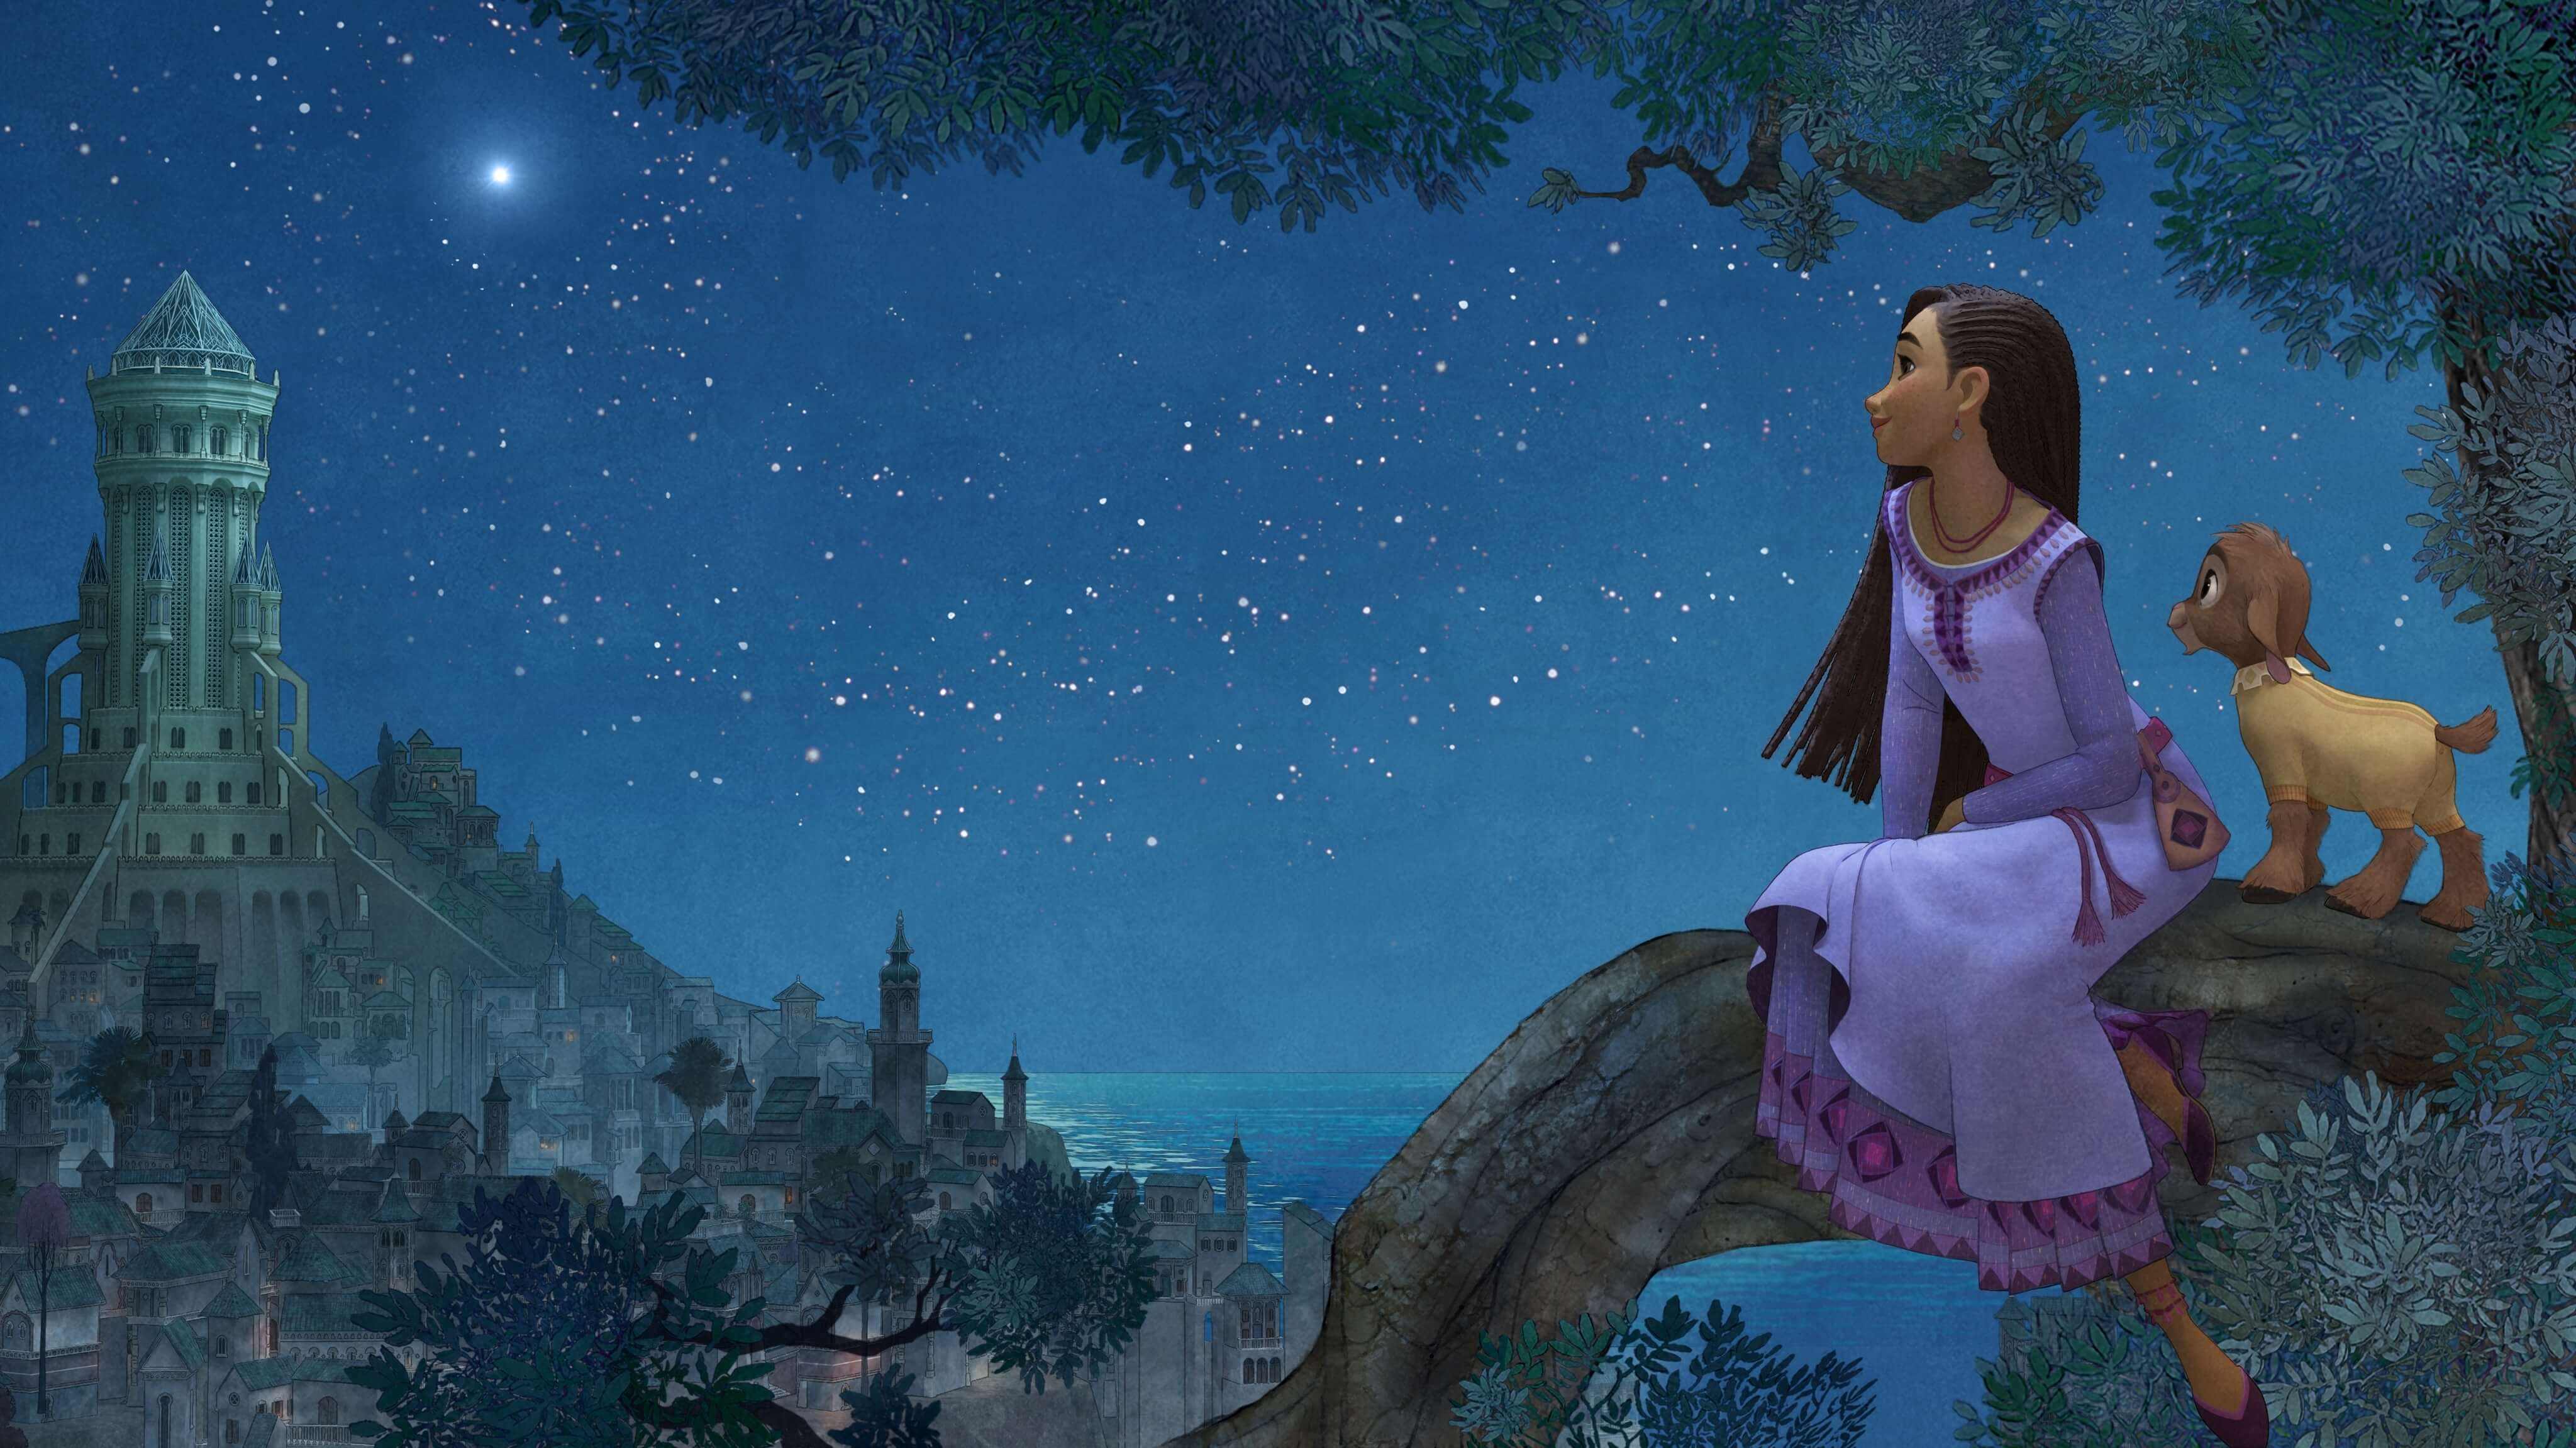 Still image from the film Wish showing a young woman with a baby goat gazing at the night sky.